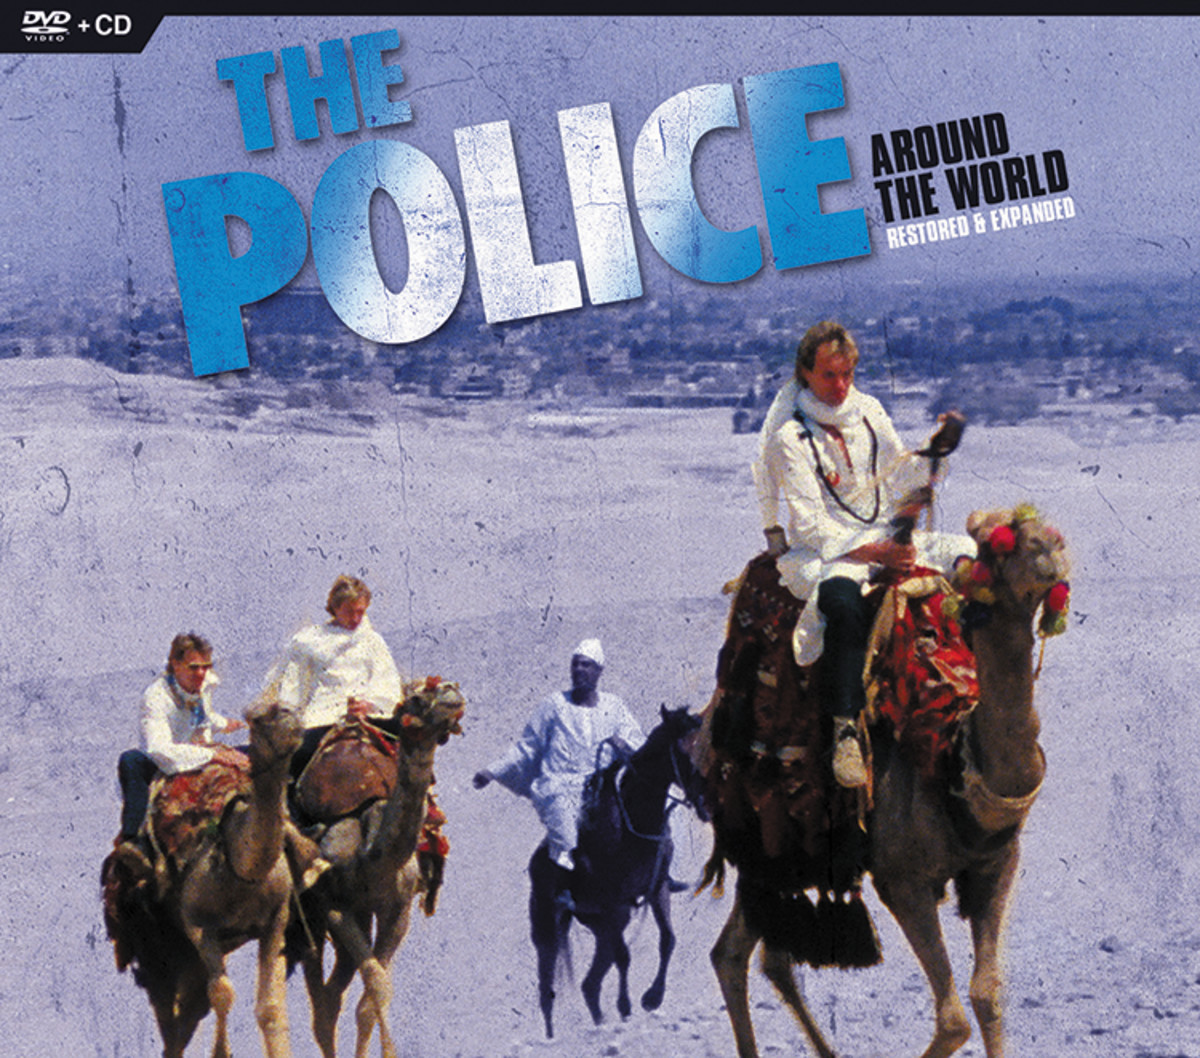 Available on DVD for the first time, "Around The World" is presented DVD/CD with restored picture and remastered audio, following The Police on their first world tour in 1979 & 1980.